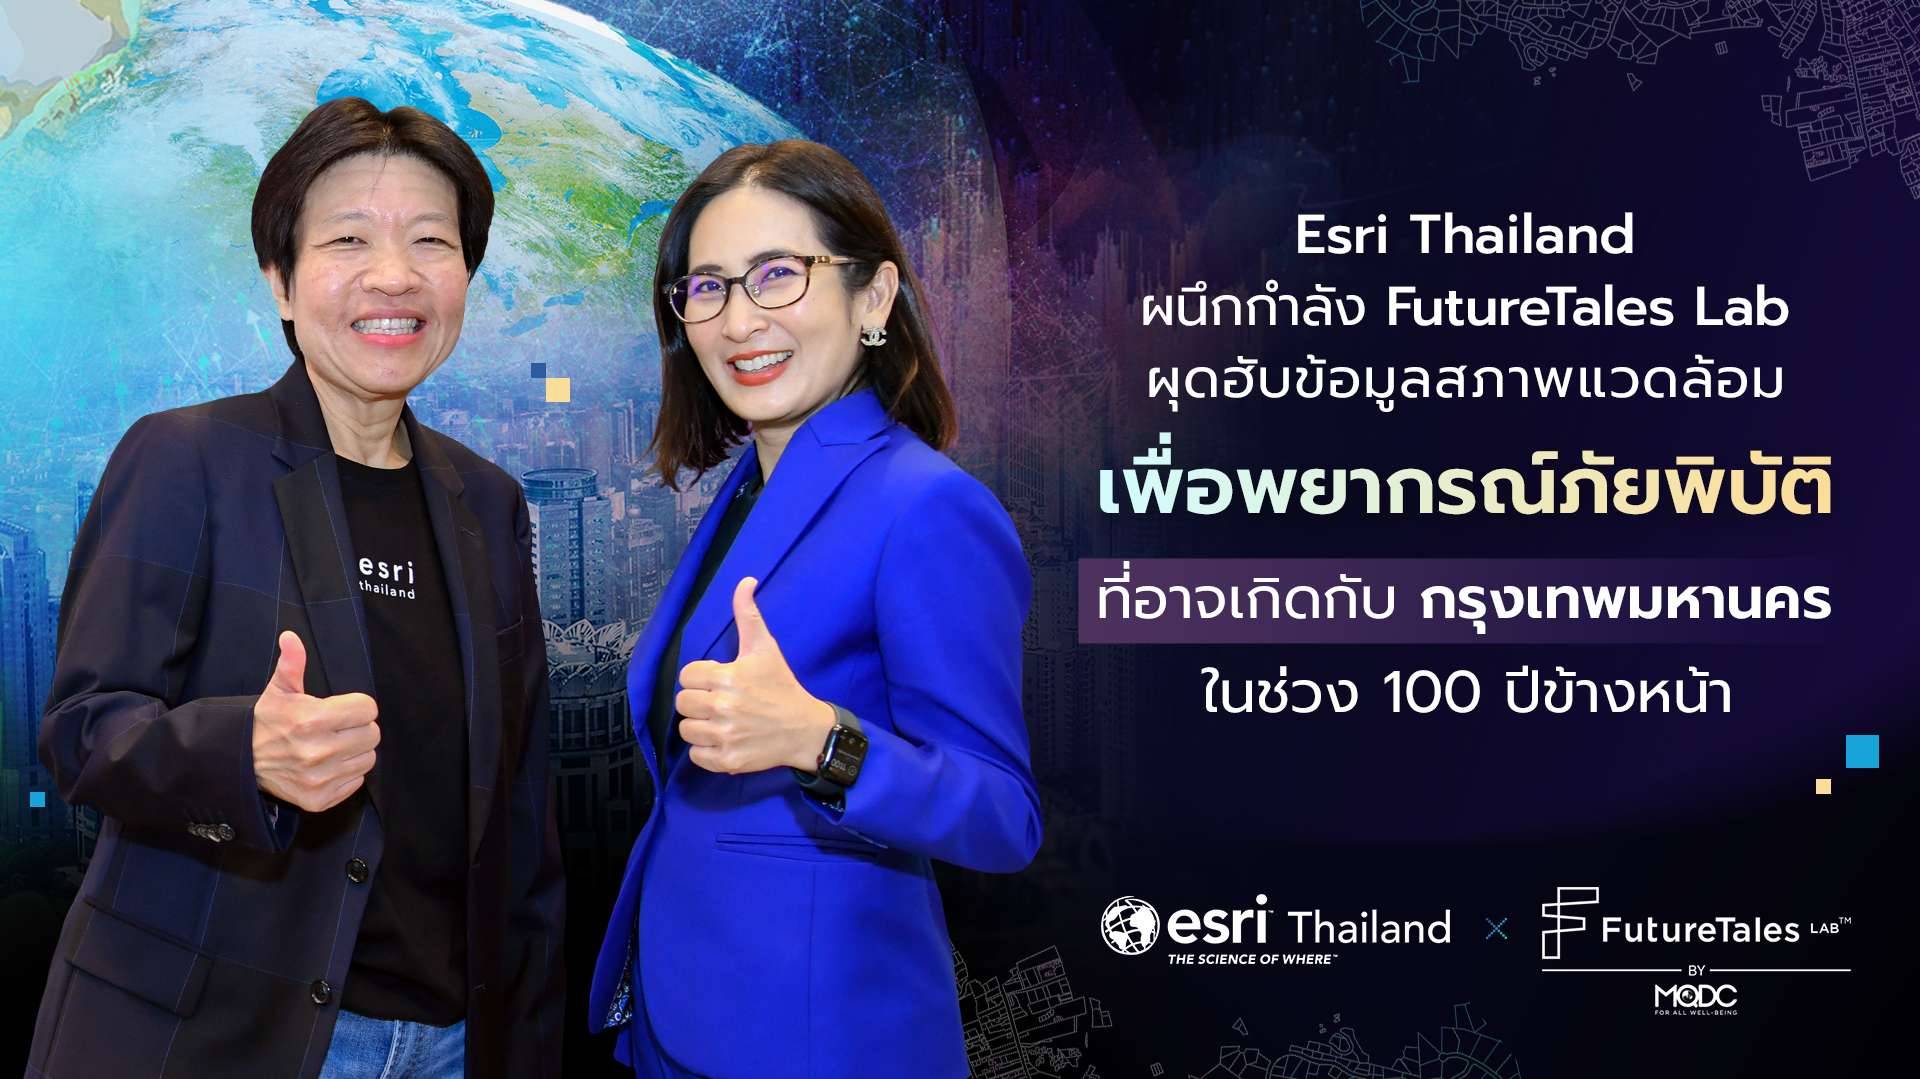 Esri Thailand joins forces with FutureTales Lab to launch environment data hub Predict disasters that may happen to Bangkok in the next 100 years